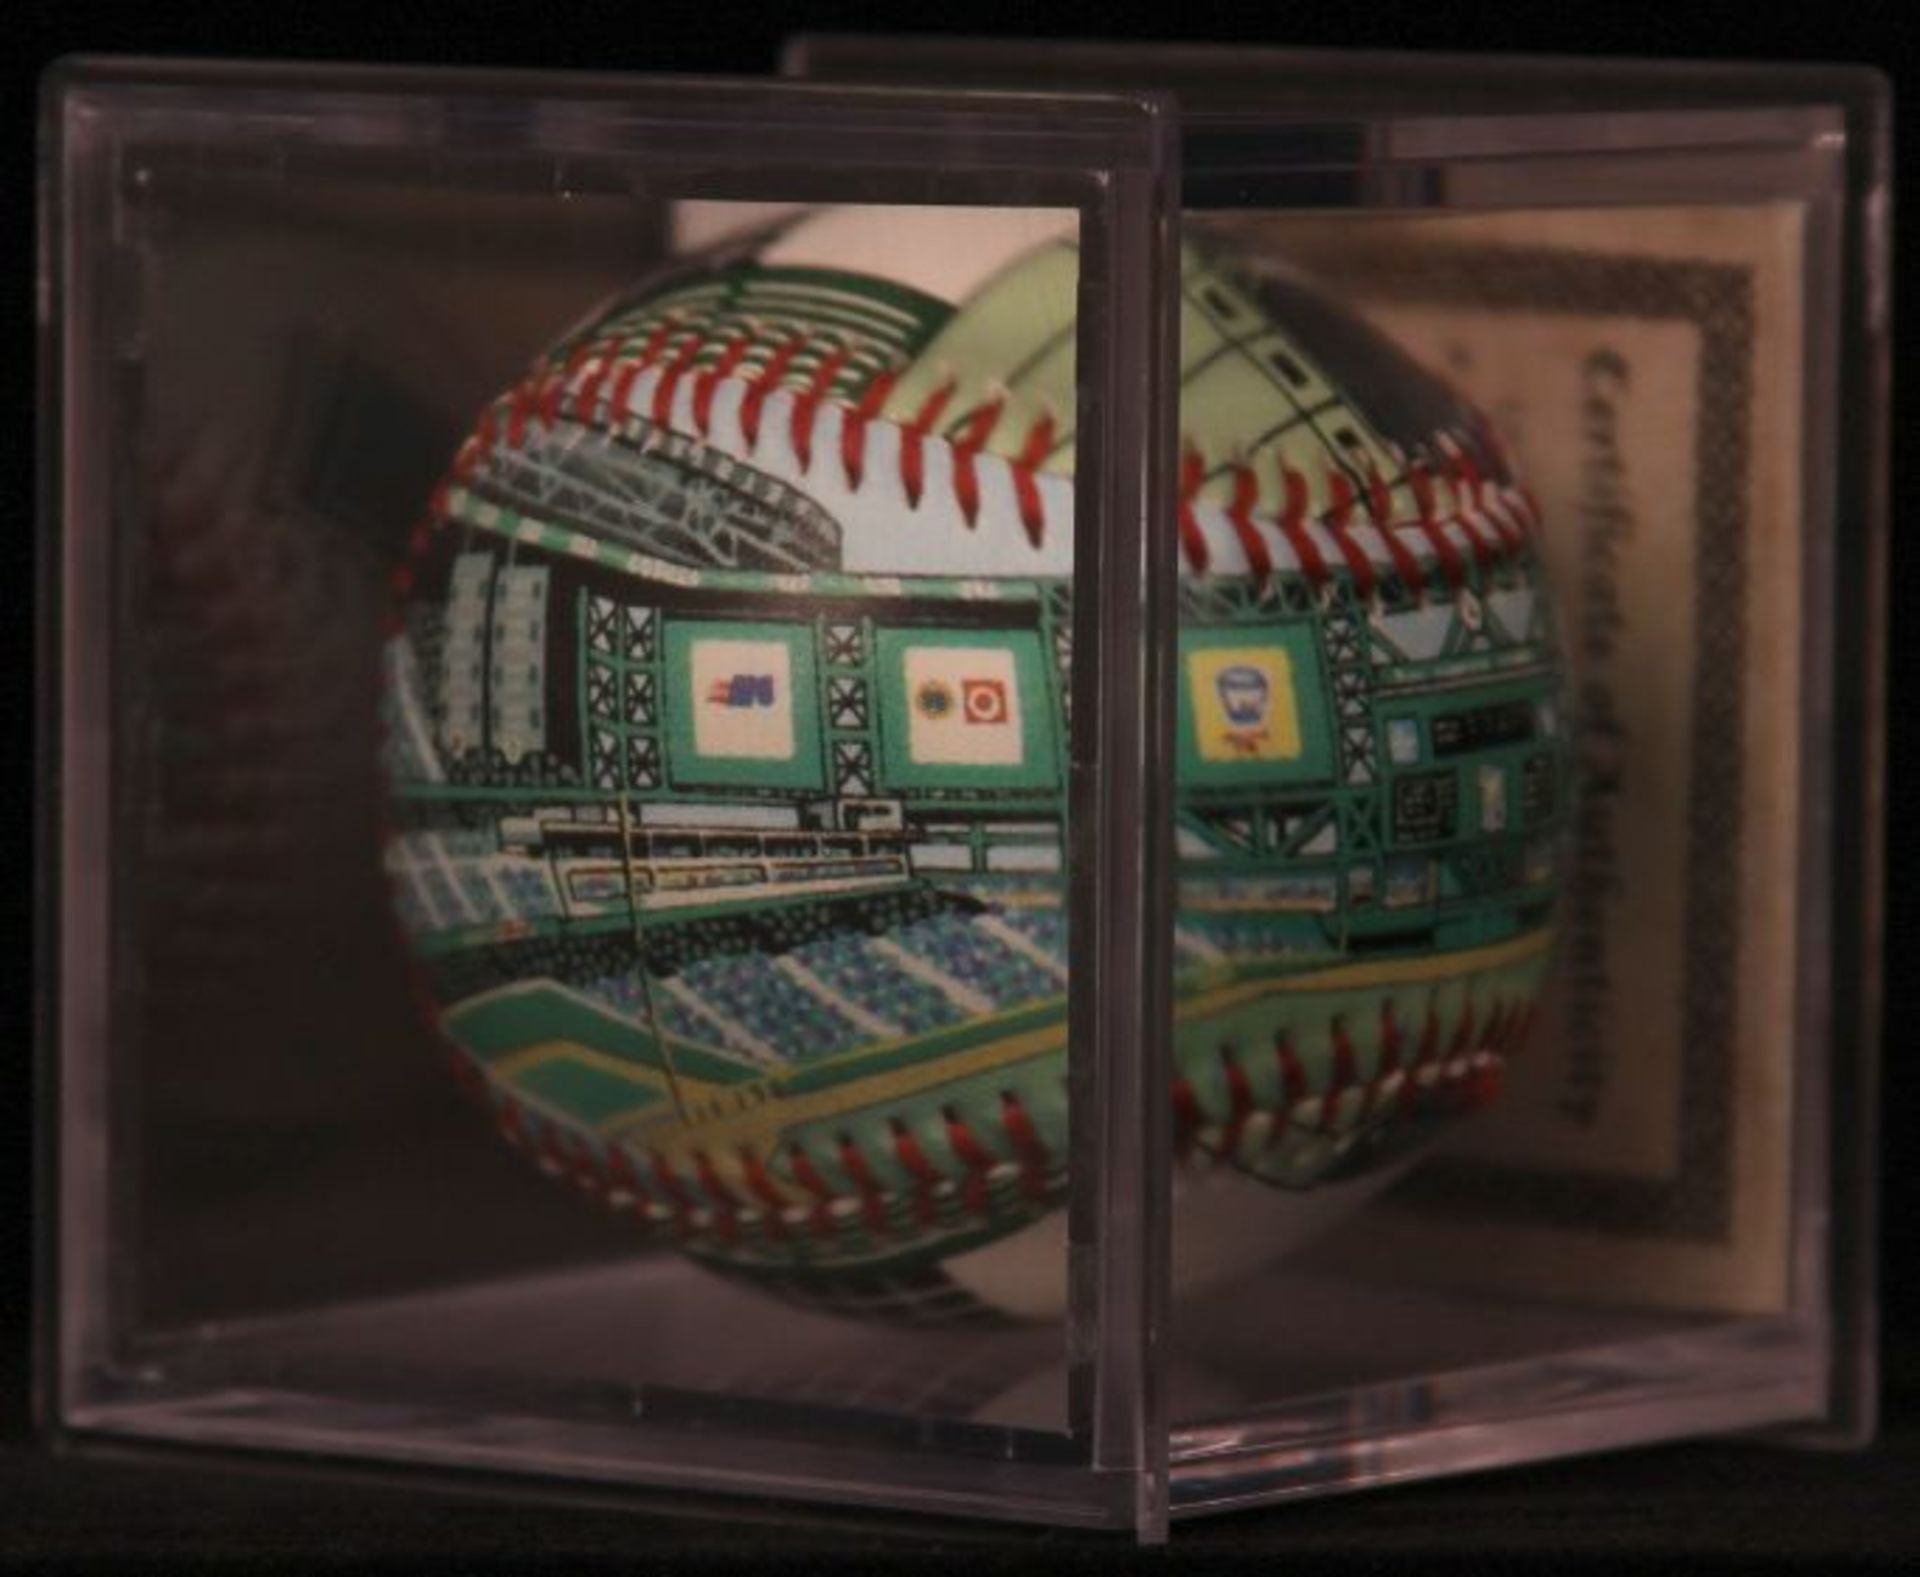 Unforgettaball! "Bank One Ballpark" Collectable Baseball - Image 5 of 6